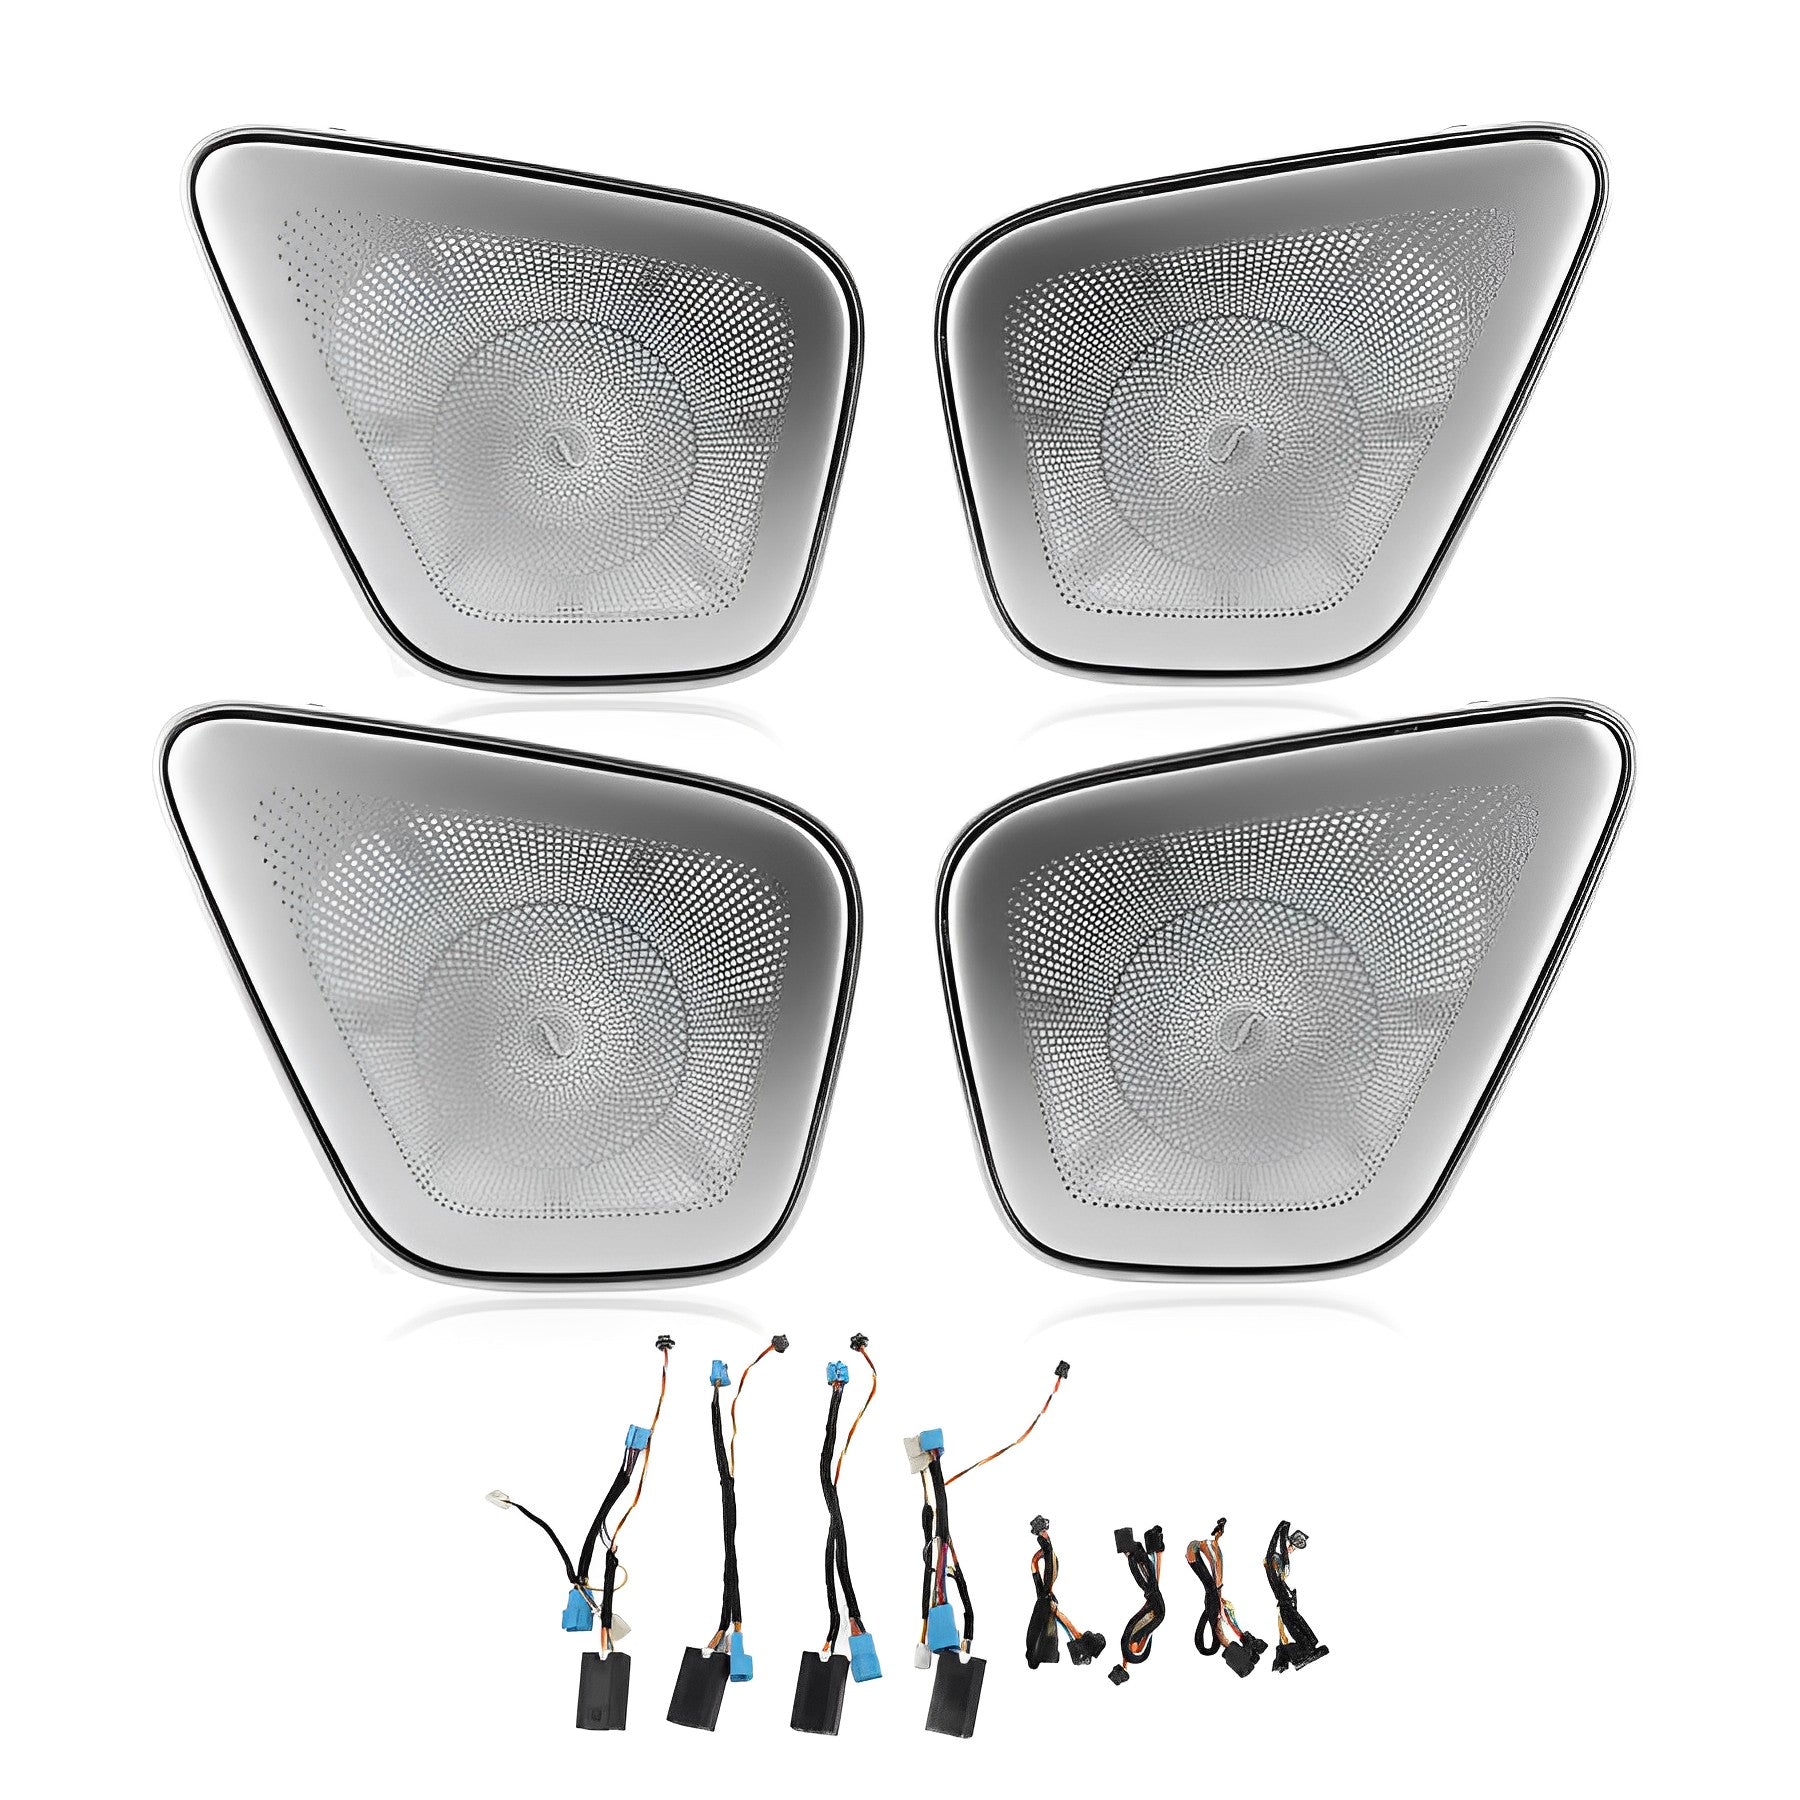 Speaker Covers with Ambient Light for Mercedes-Benz A,B,CLA,GLA